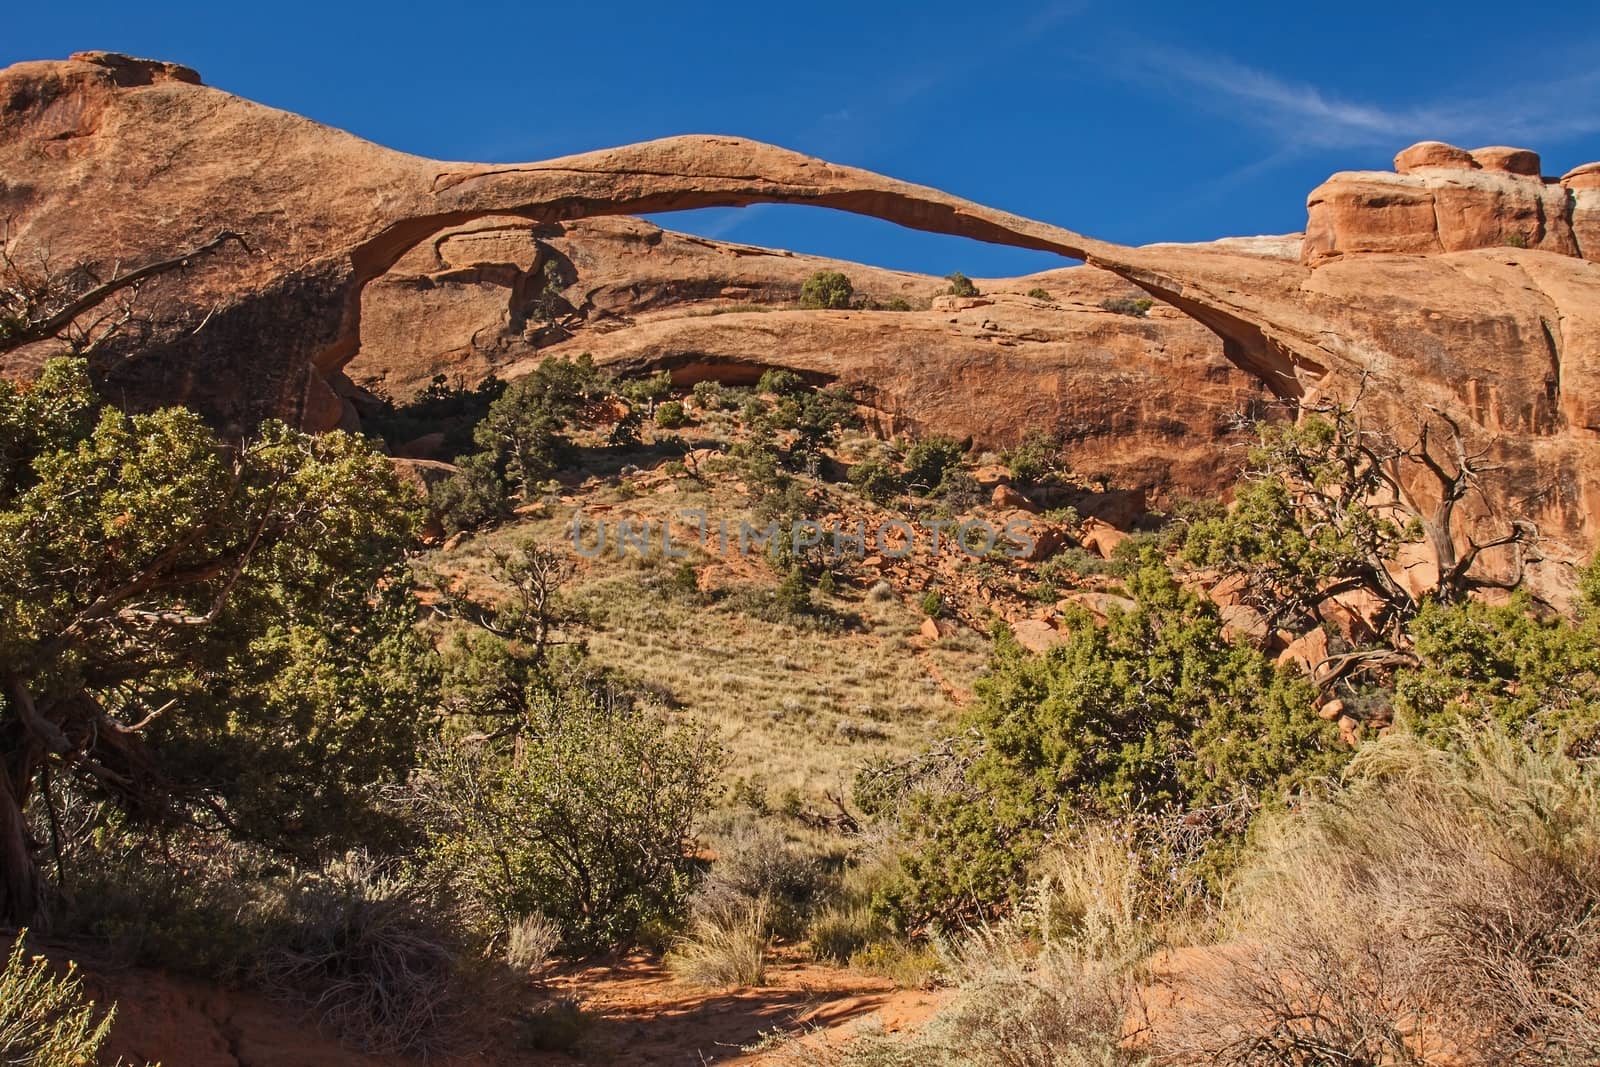 The Landscape Arch, Arches National Park Utah 1 by kobus_peche